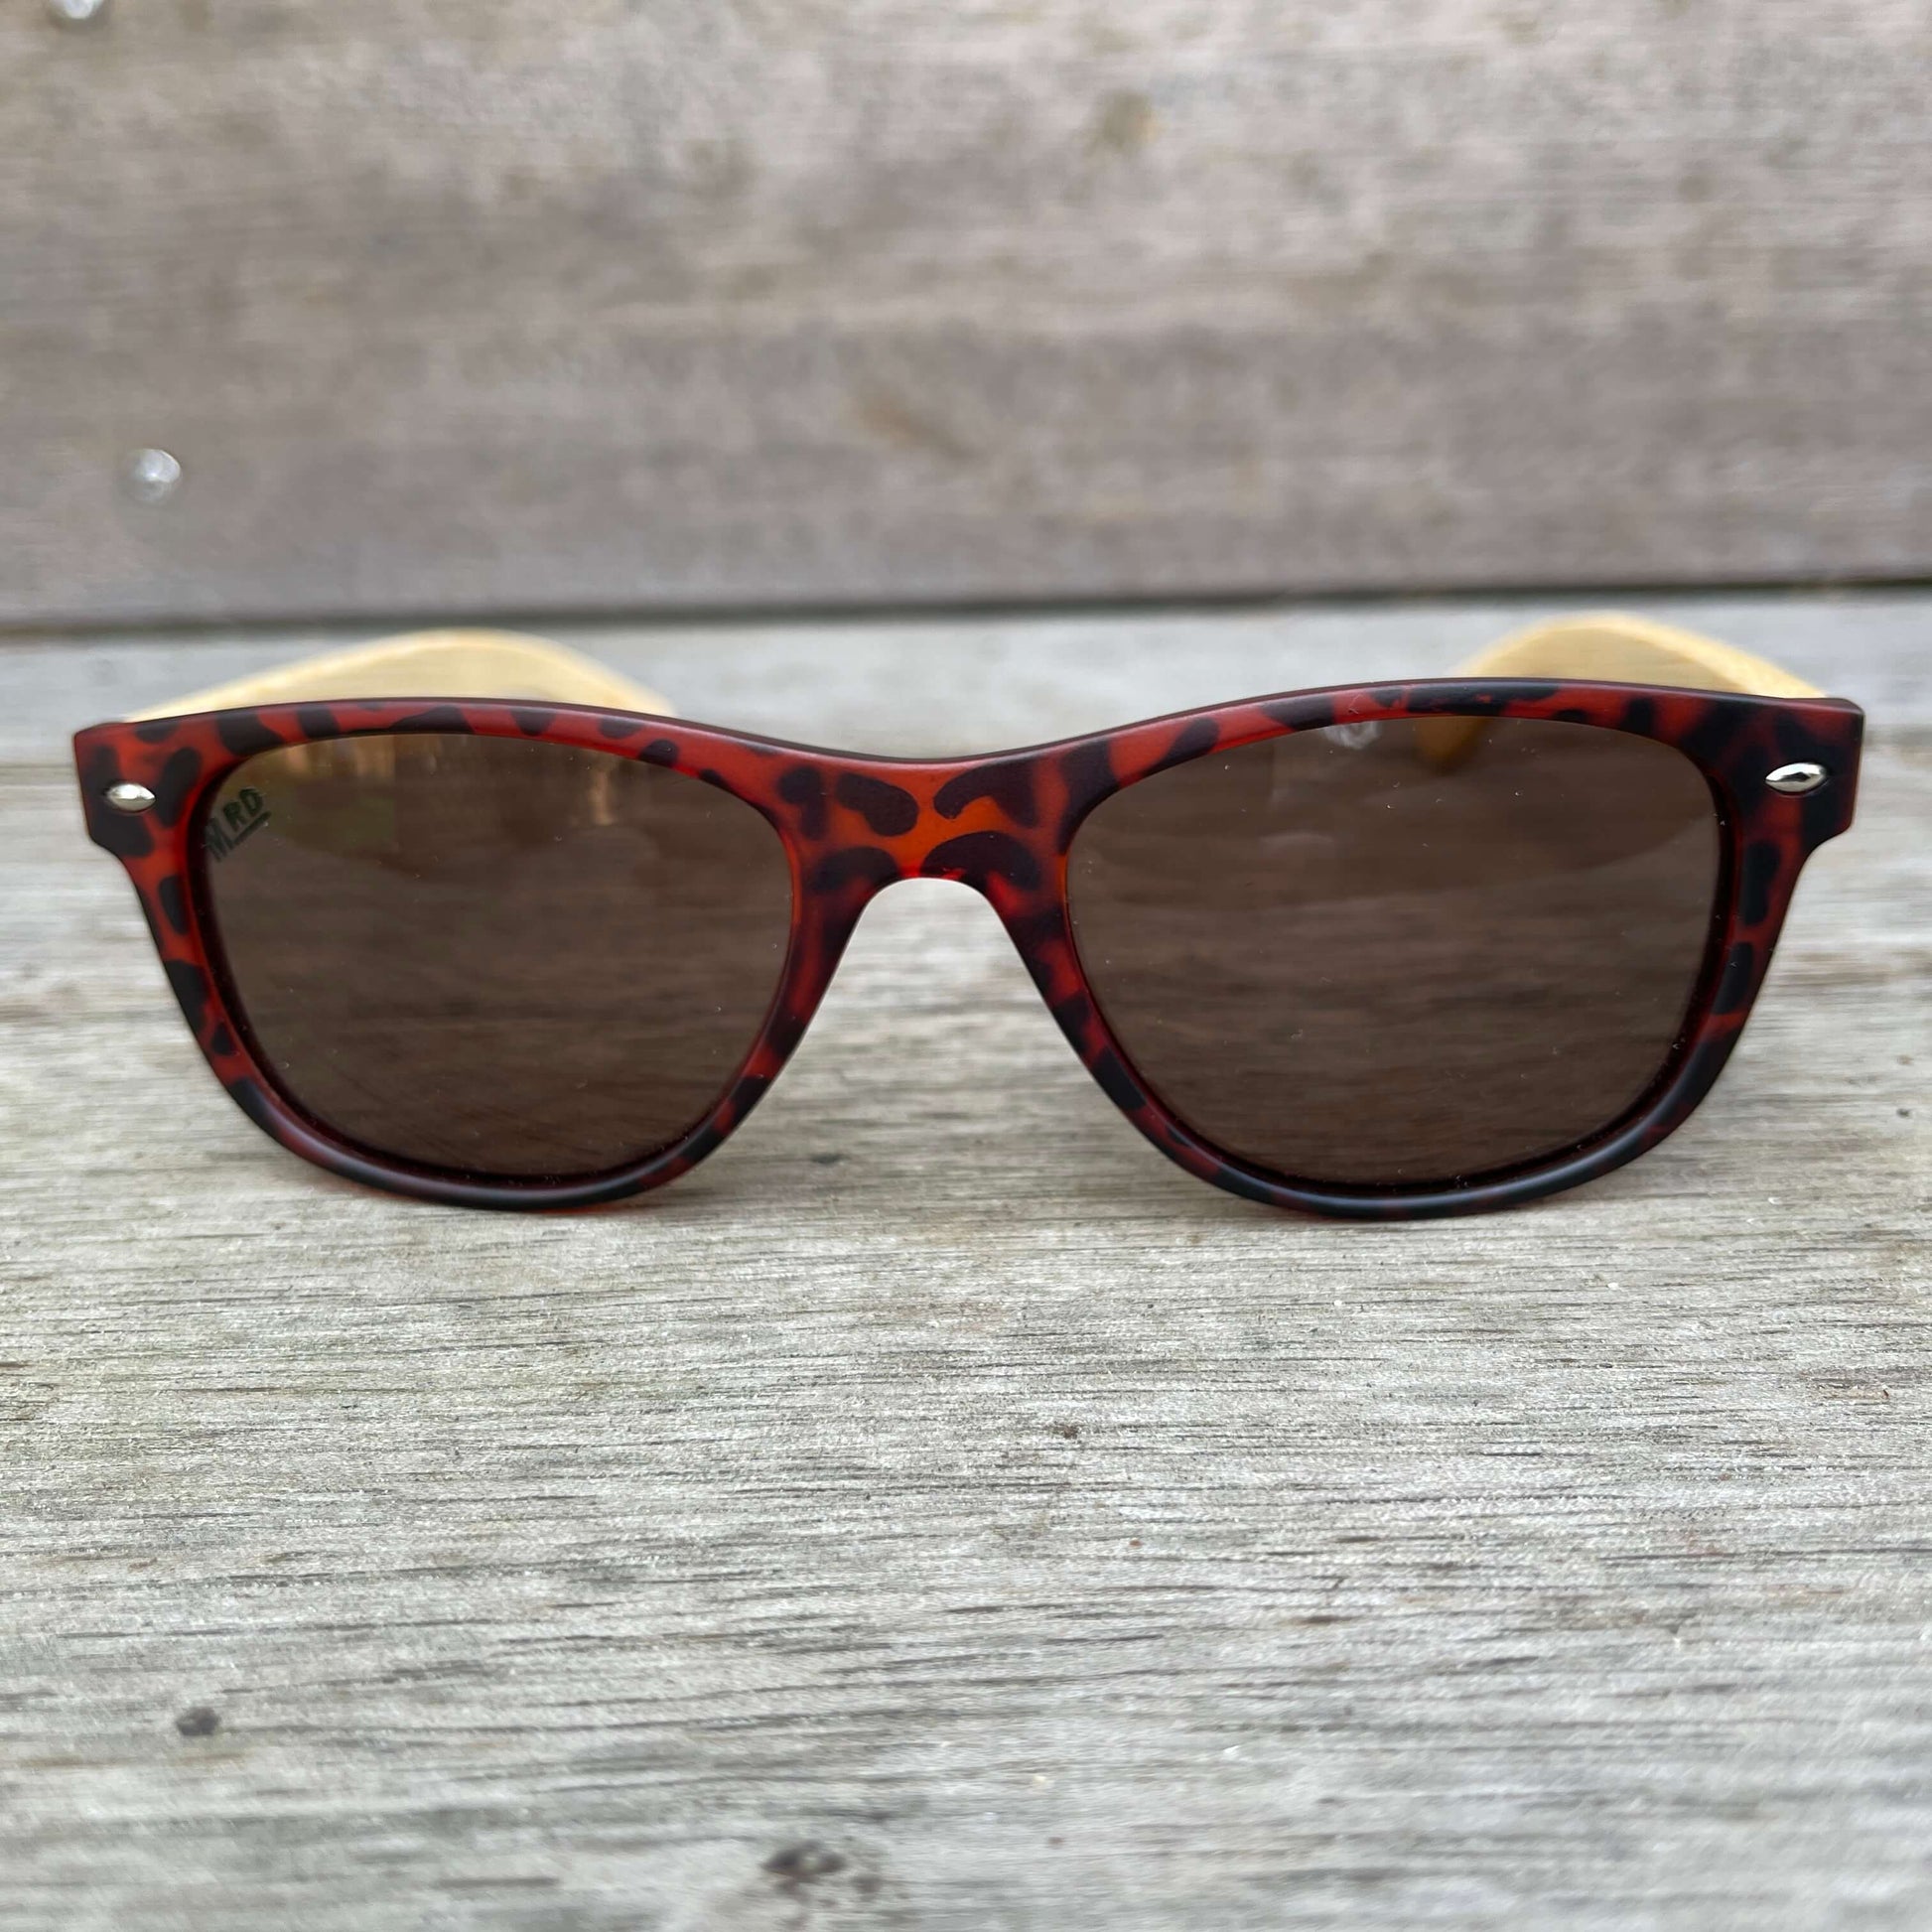 Kids sunglasses with Tortoiseshell frame and wooden arms.